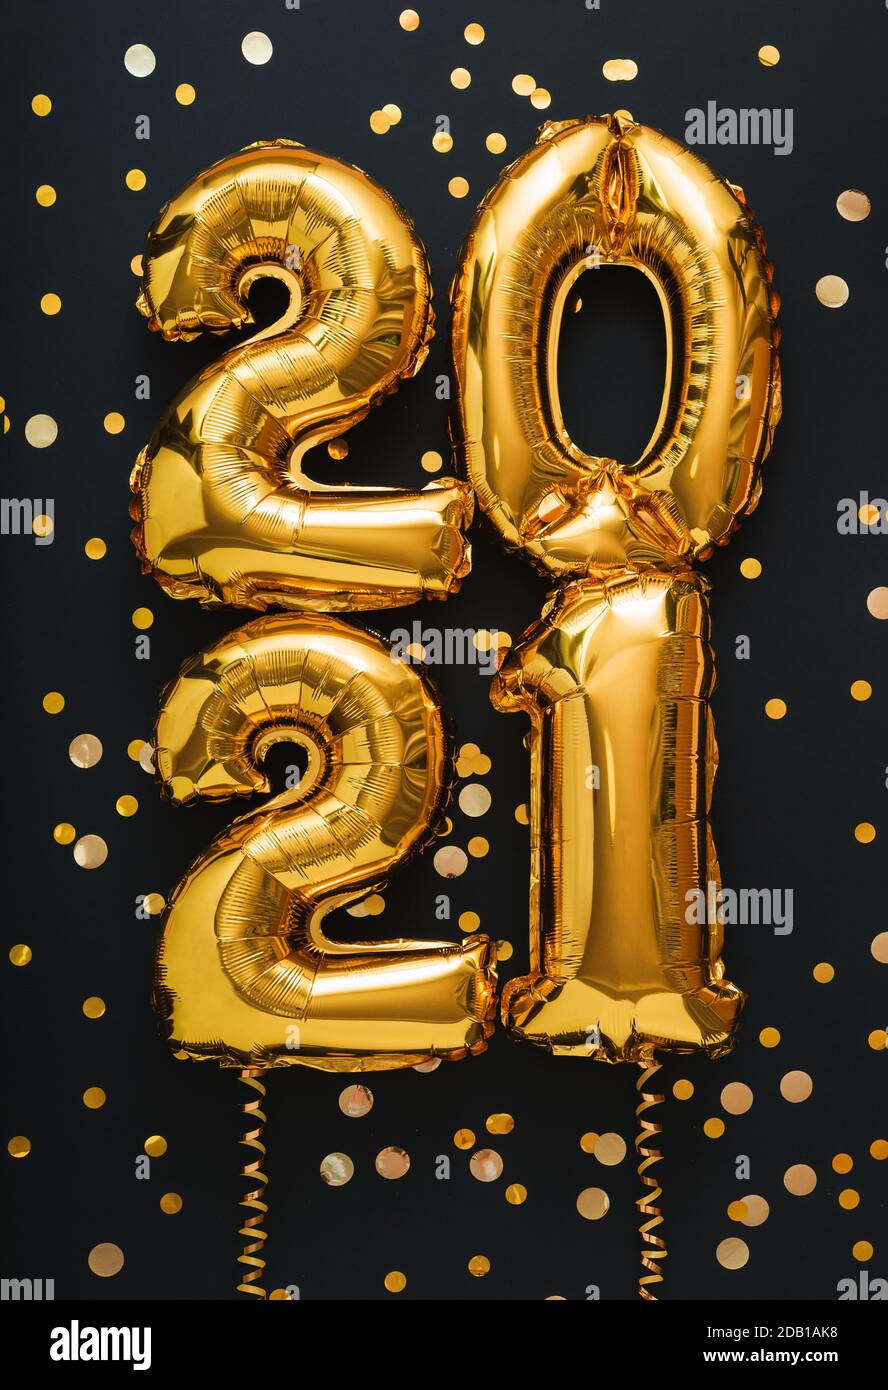 2021 balloon gold text on black background with golden confetti, festive decor. Happy New year eve invitation with Christmas gold foil balloons 2021. Stock Photo